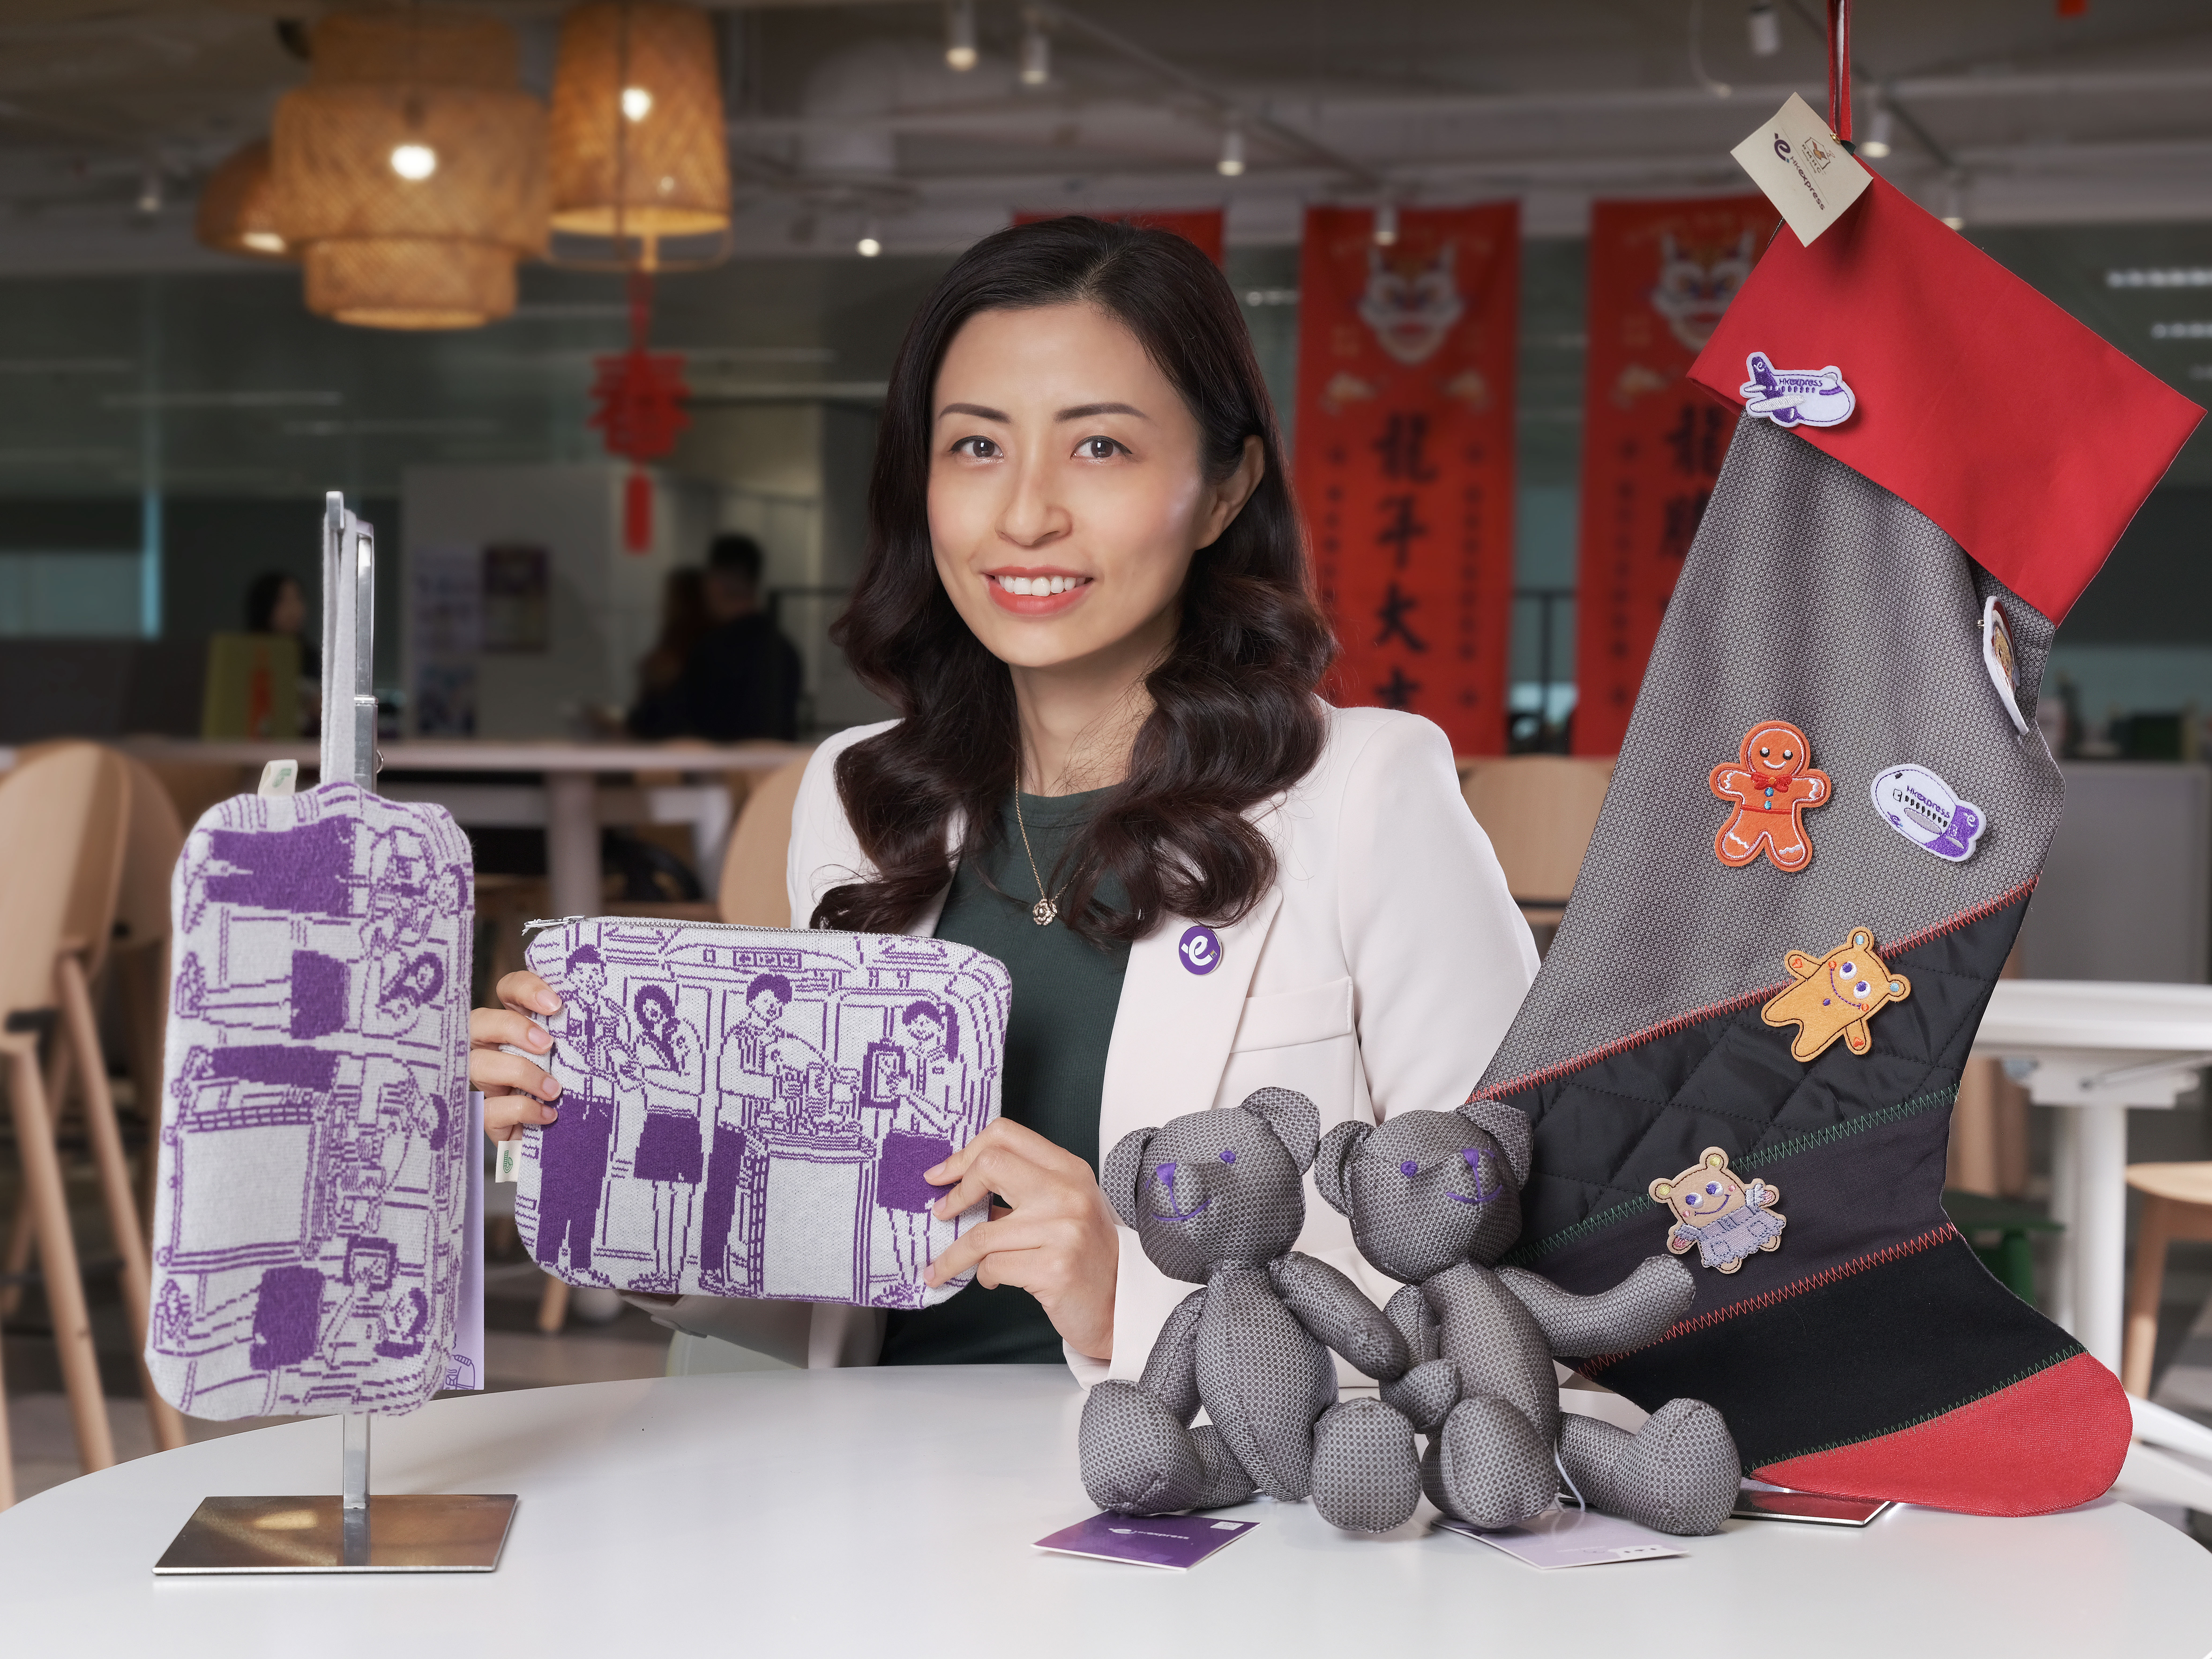 HK Express Breathes New Life into Old Uniforms Collaborating with “Moving Drawing” for Upcycled Travel Pouch